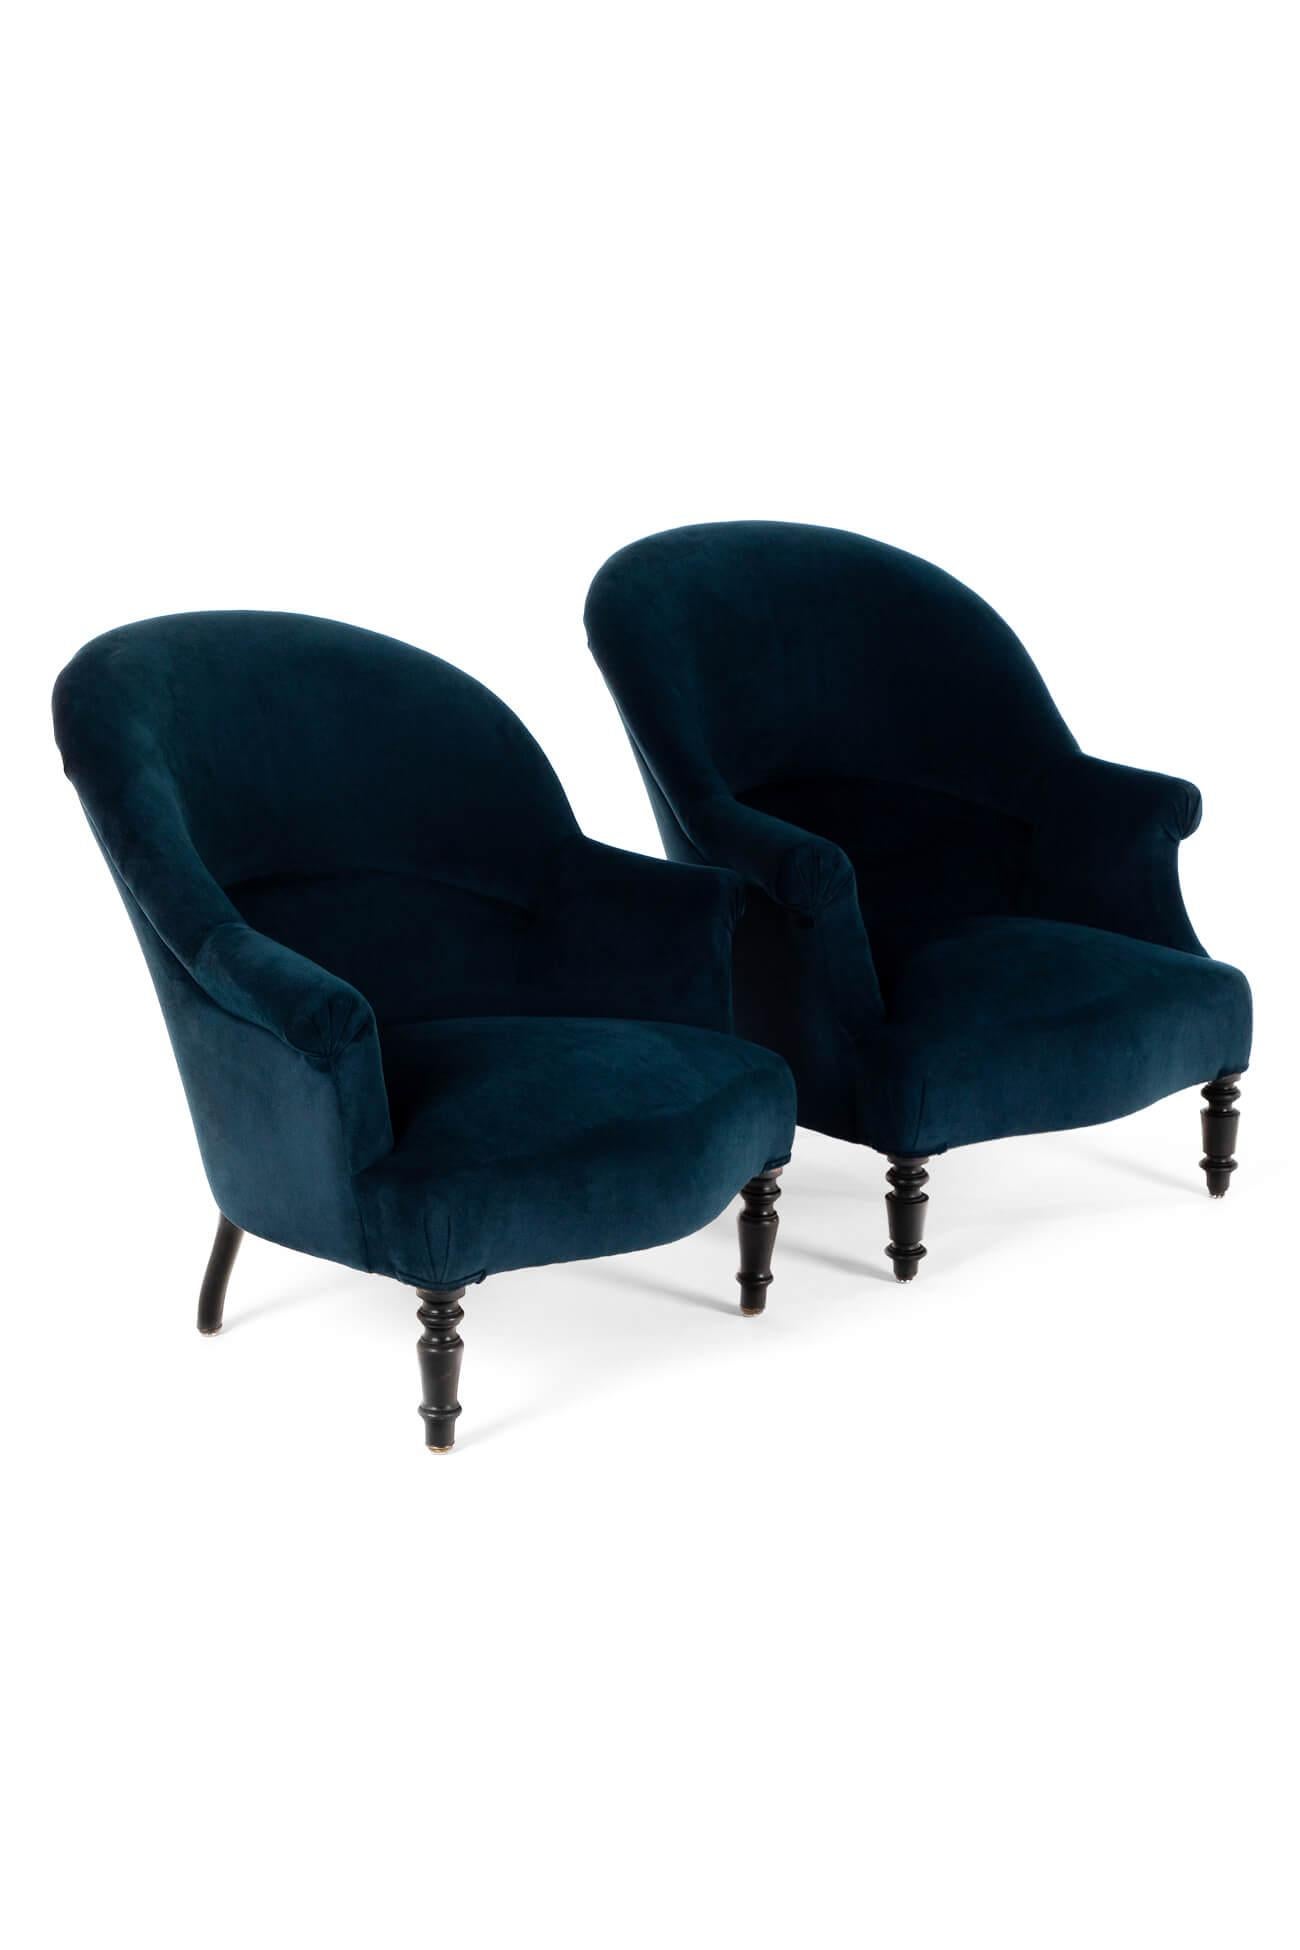 A set of late 19th century Napoleon III crapaud armchairs with wide wide generous seats raised on turned ebony legs.

The armchair has been fully restored and stripped back to the solid beech frames for upholstery with a new coil spring base, with